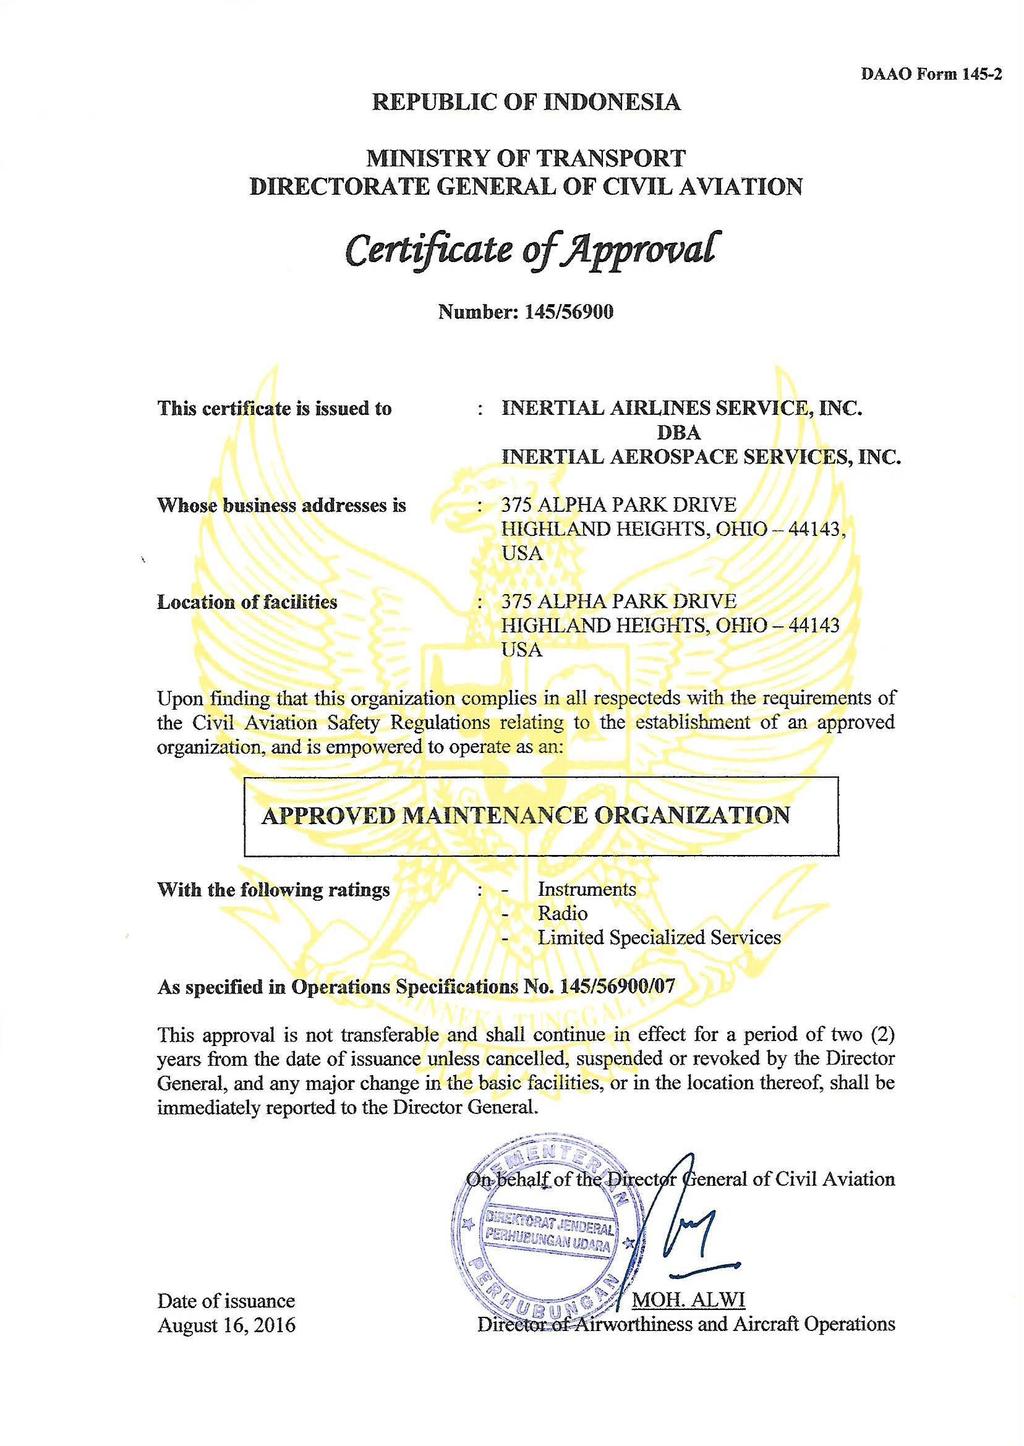 REPUBLIC OF INDONESIA DAAO Form 145-2 MINISTRY OF TRANSPORT Certificate of Jlpprova[ Number: 145/56900 This certificate is issued to 1: Whose business addresses is r~ = '.